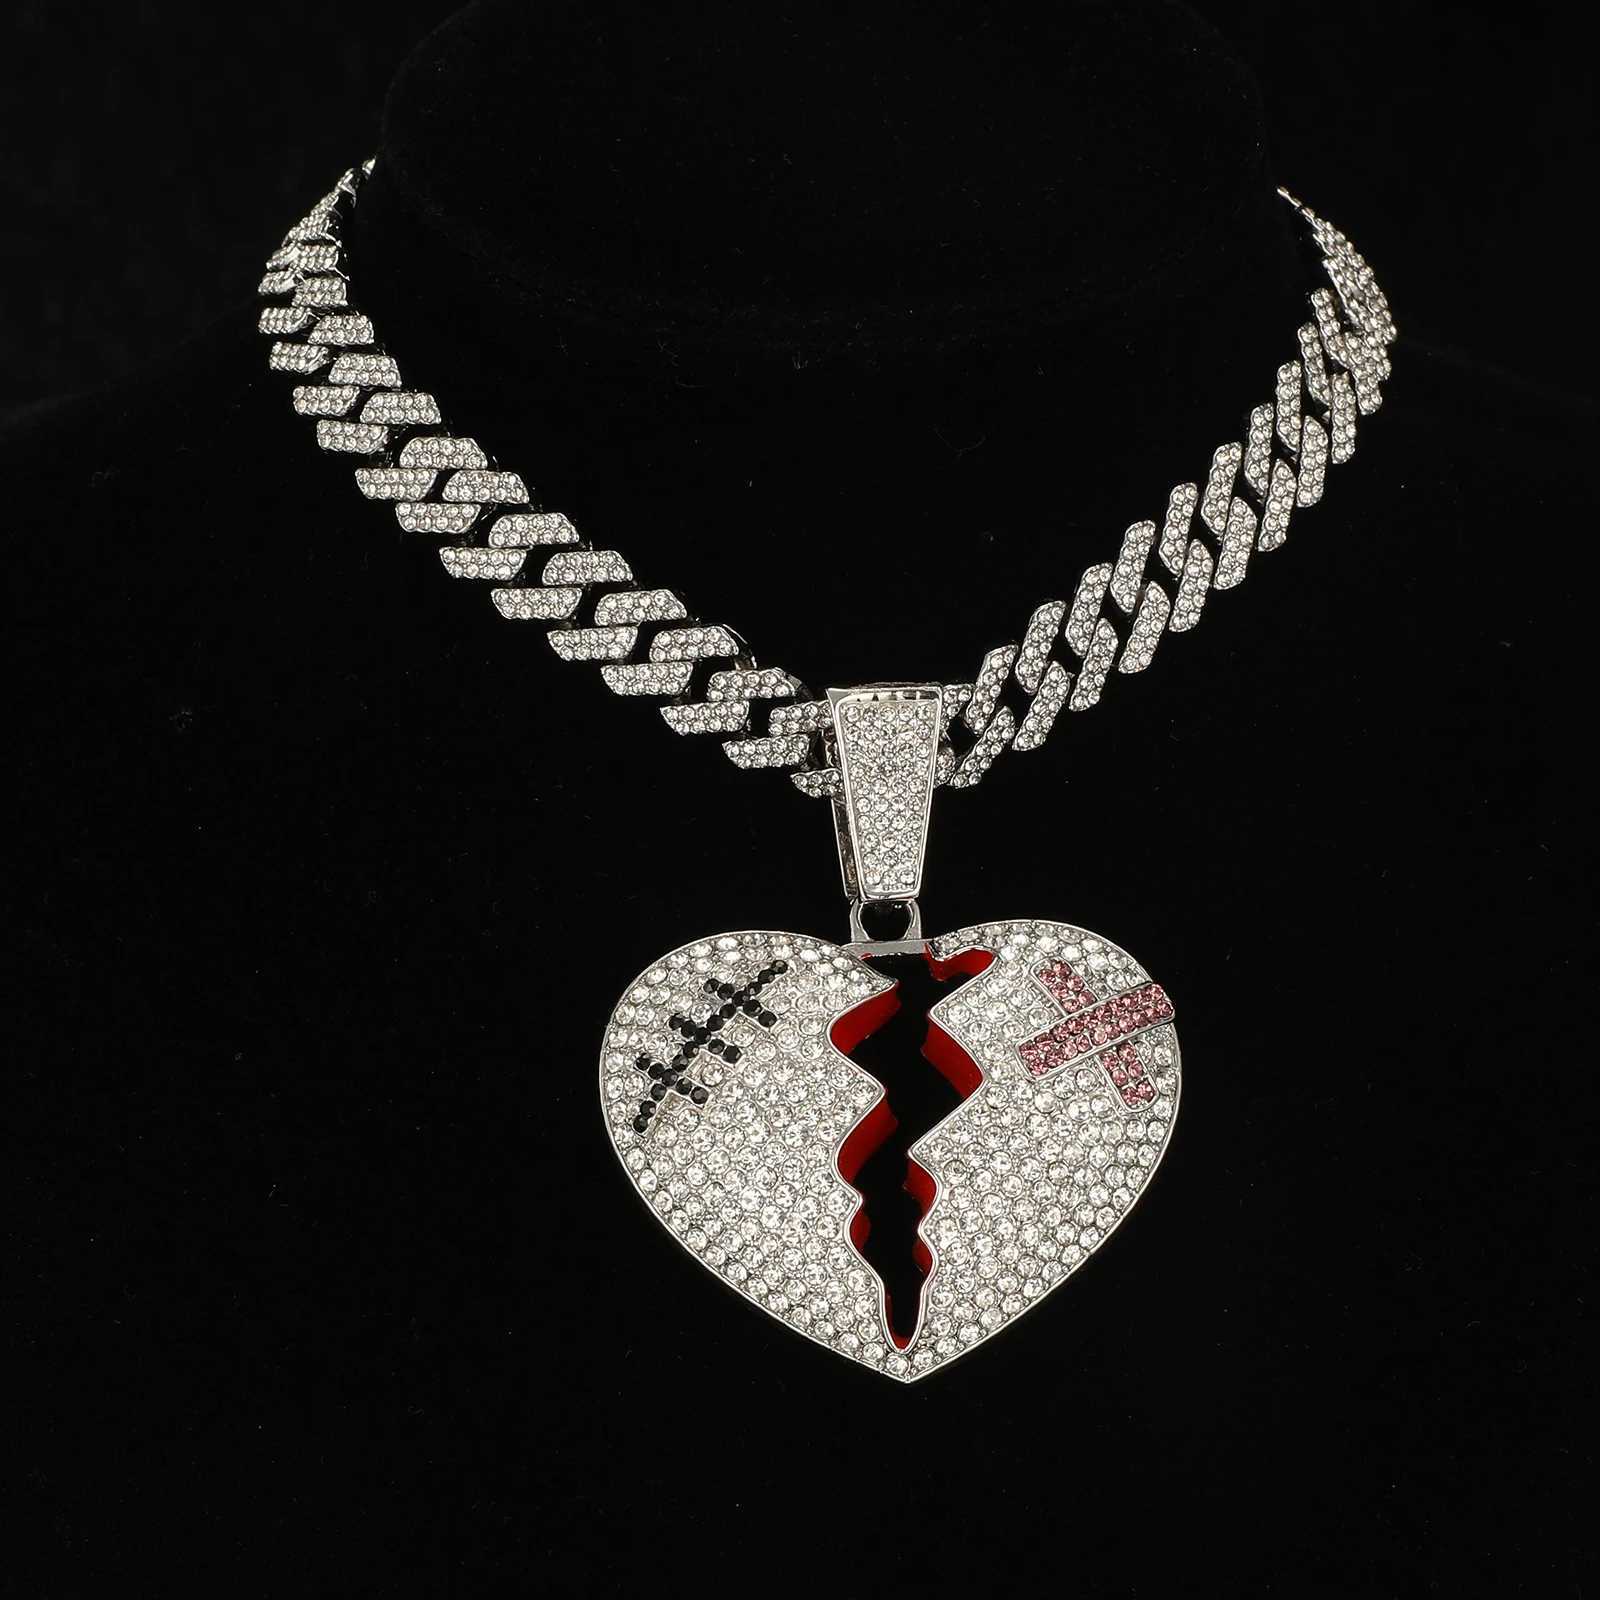 Strands HIP HOP Iced Out Broken Heart pendant with 13mm Cuban Link chain AAA+Rhinestone necklace suitable for mens rapper jewelry 240424